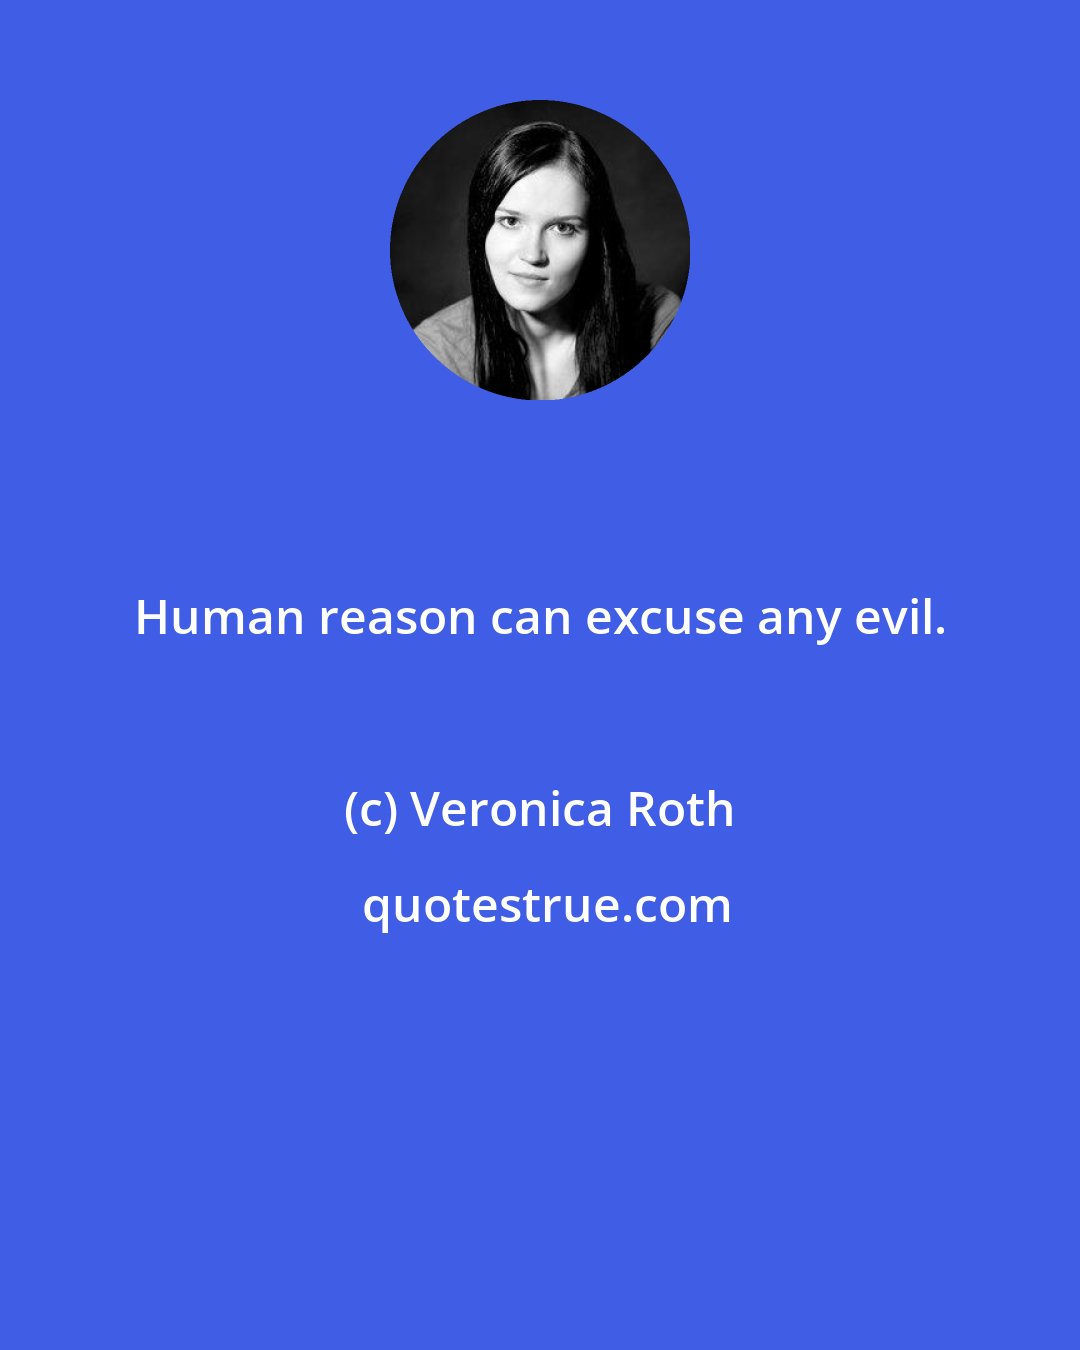 Veronica Roth: Human reason can excuse any evil.